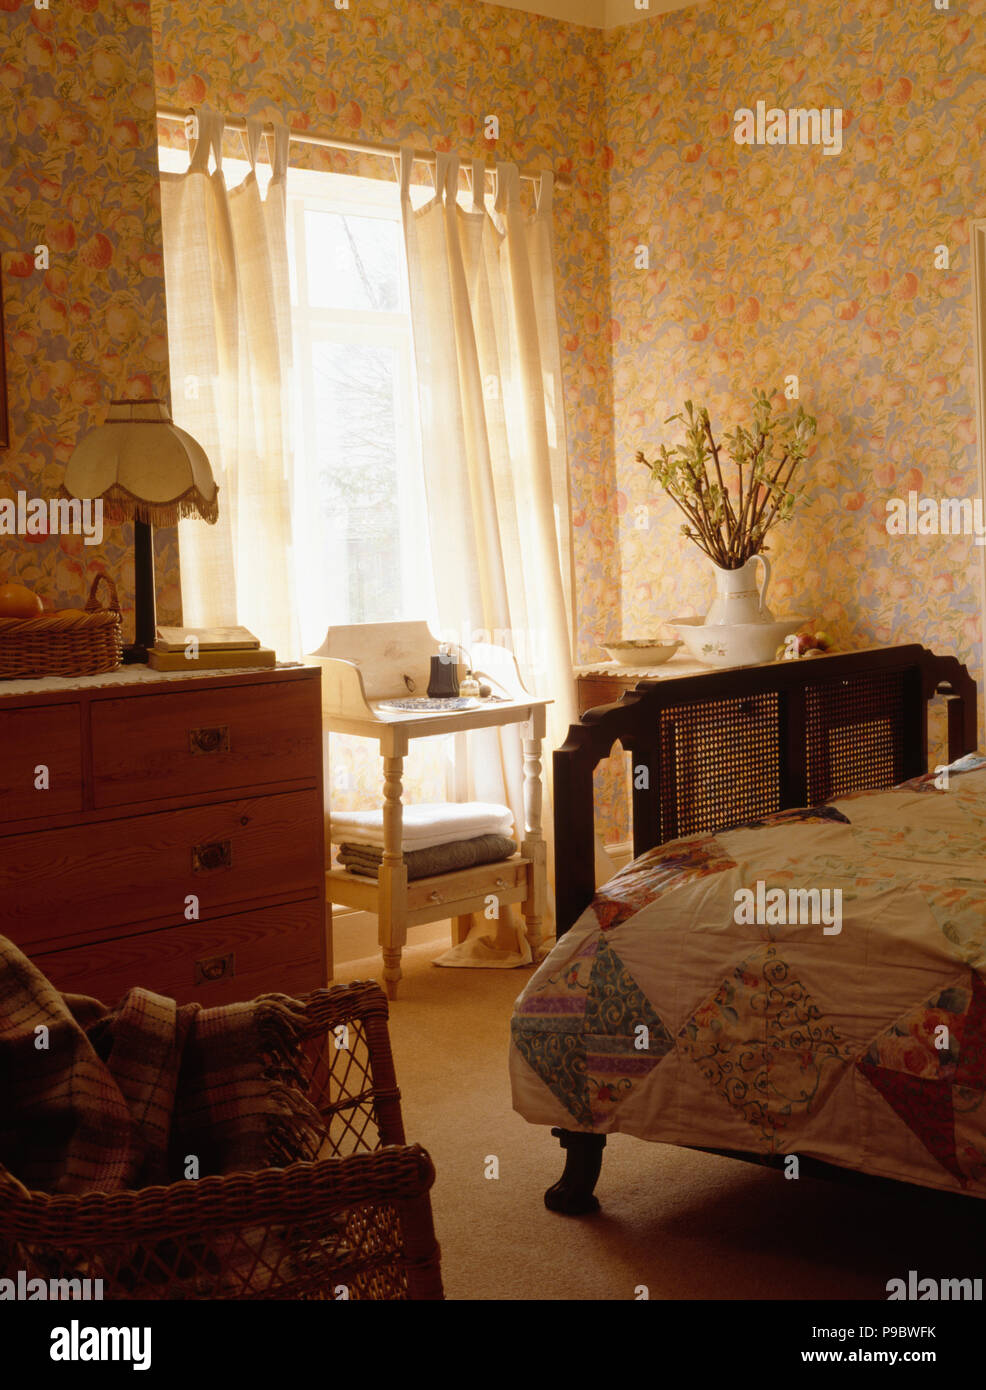 Patterned Wallpaper And Cream Curtains In Nineties Bedroom